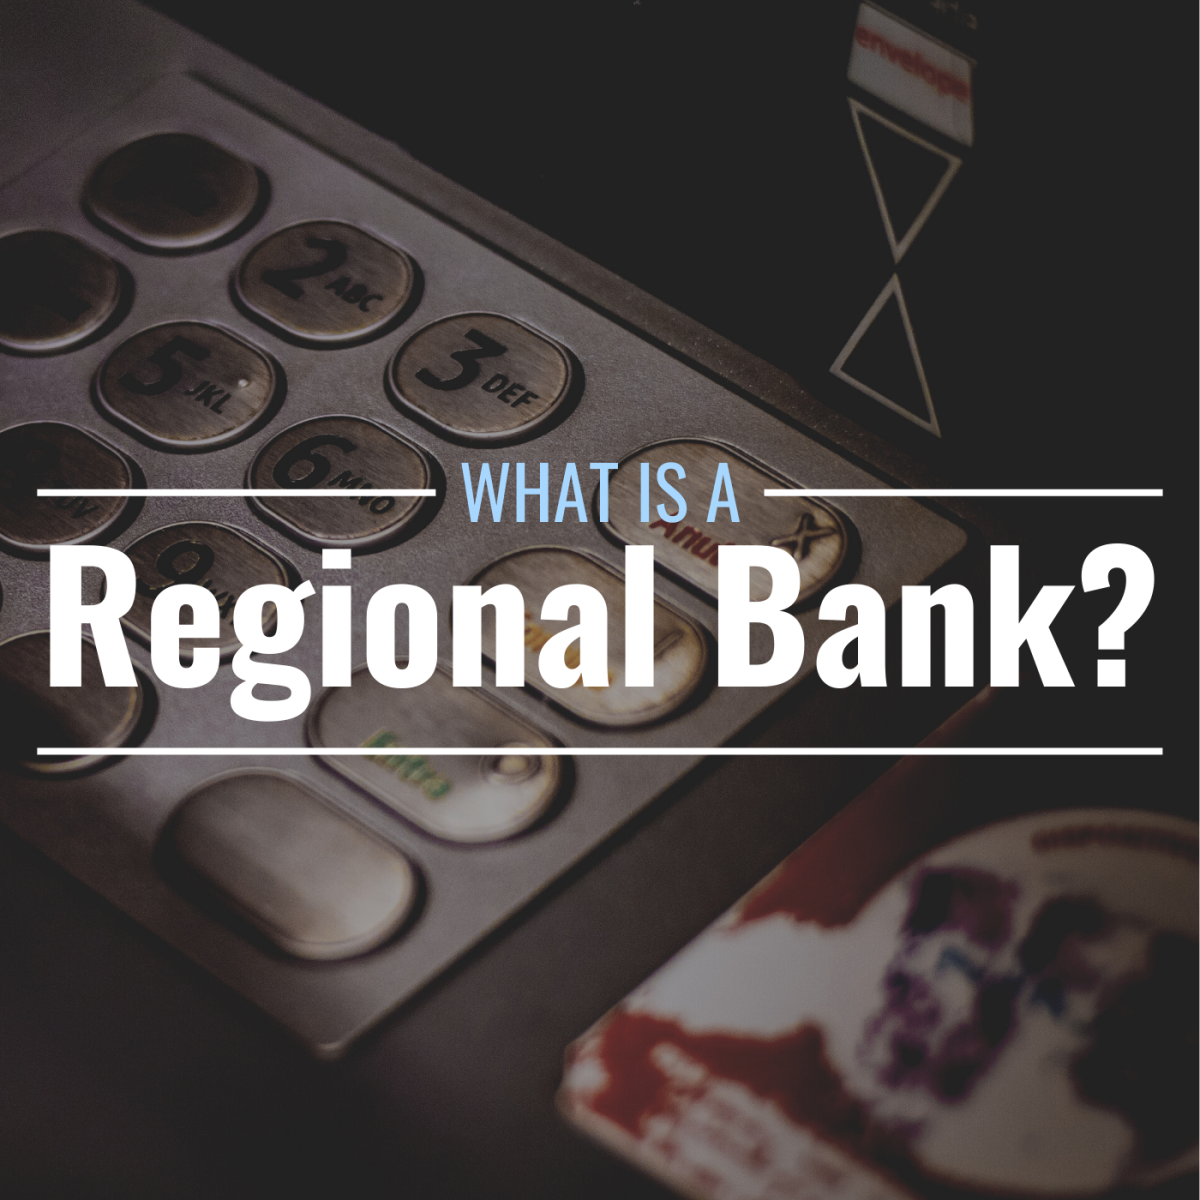 Darkened photo of the keypad of an ATM with text overlay that reads "What Is a Regional Bank?"